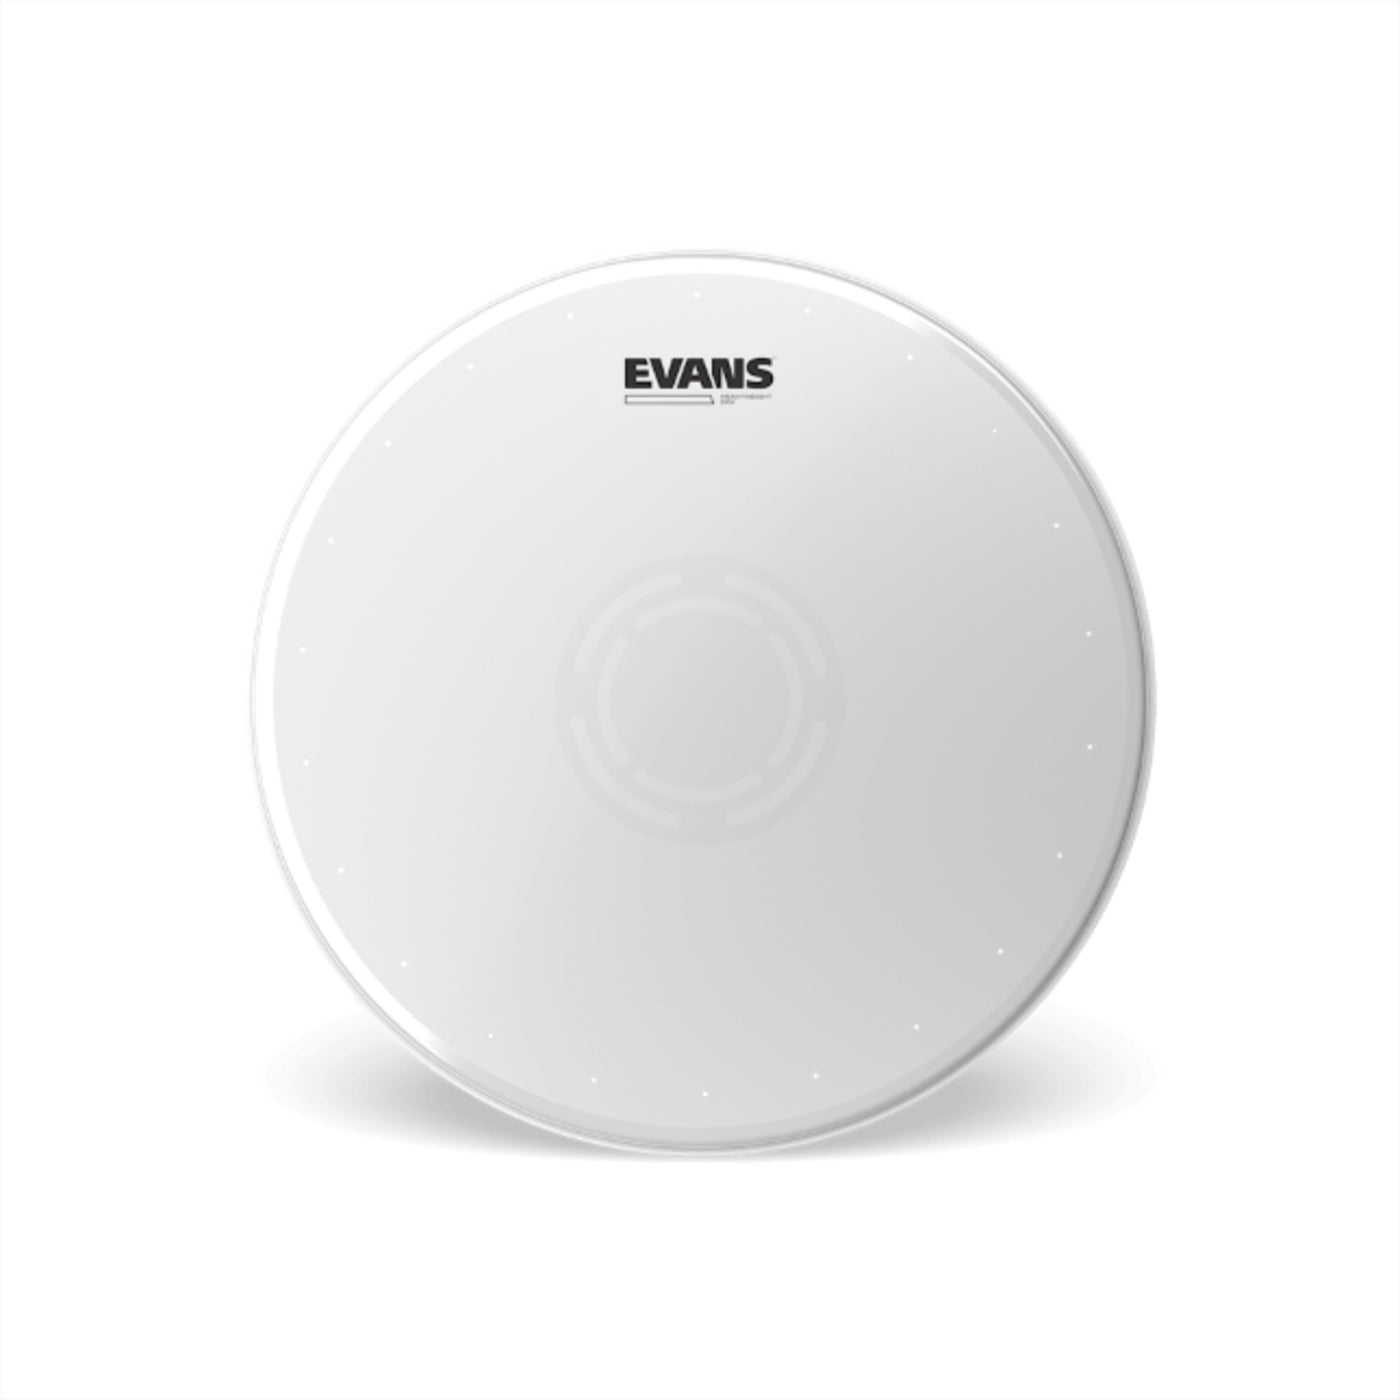 Evans B13HWD Heavyweight Dry Snare Drum Head for Drum Set, 13 Inch